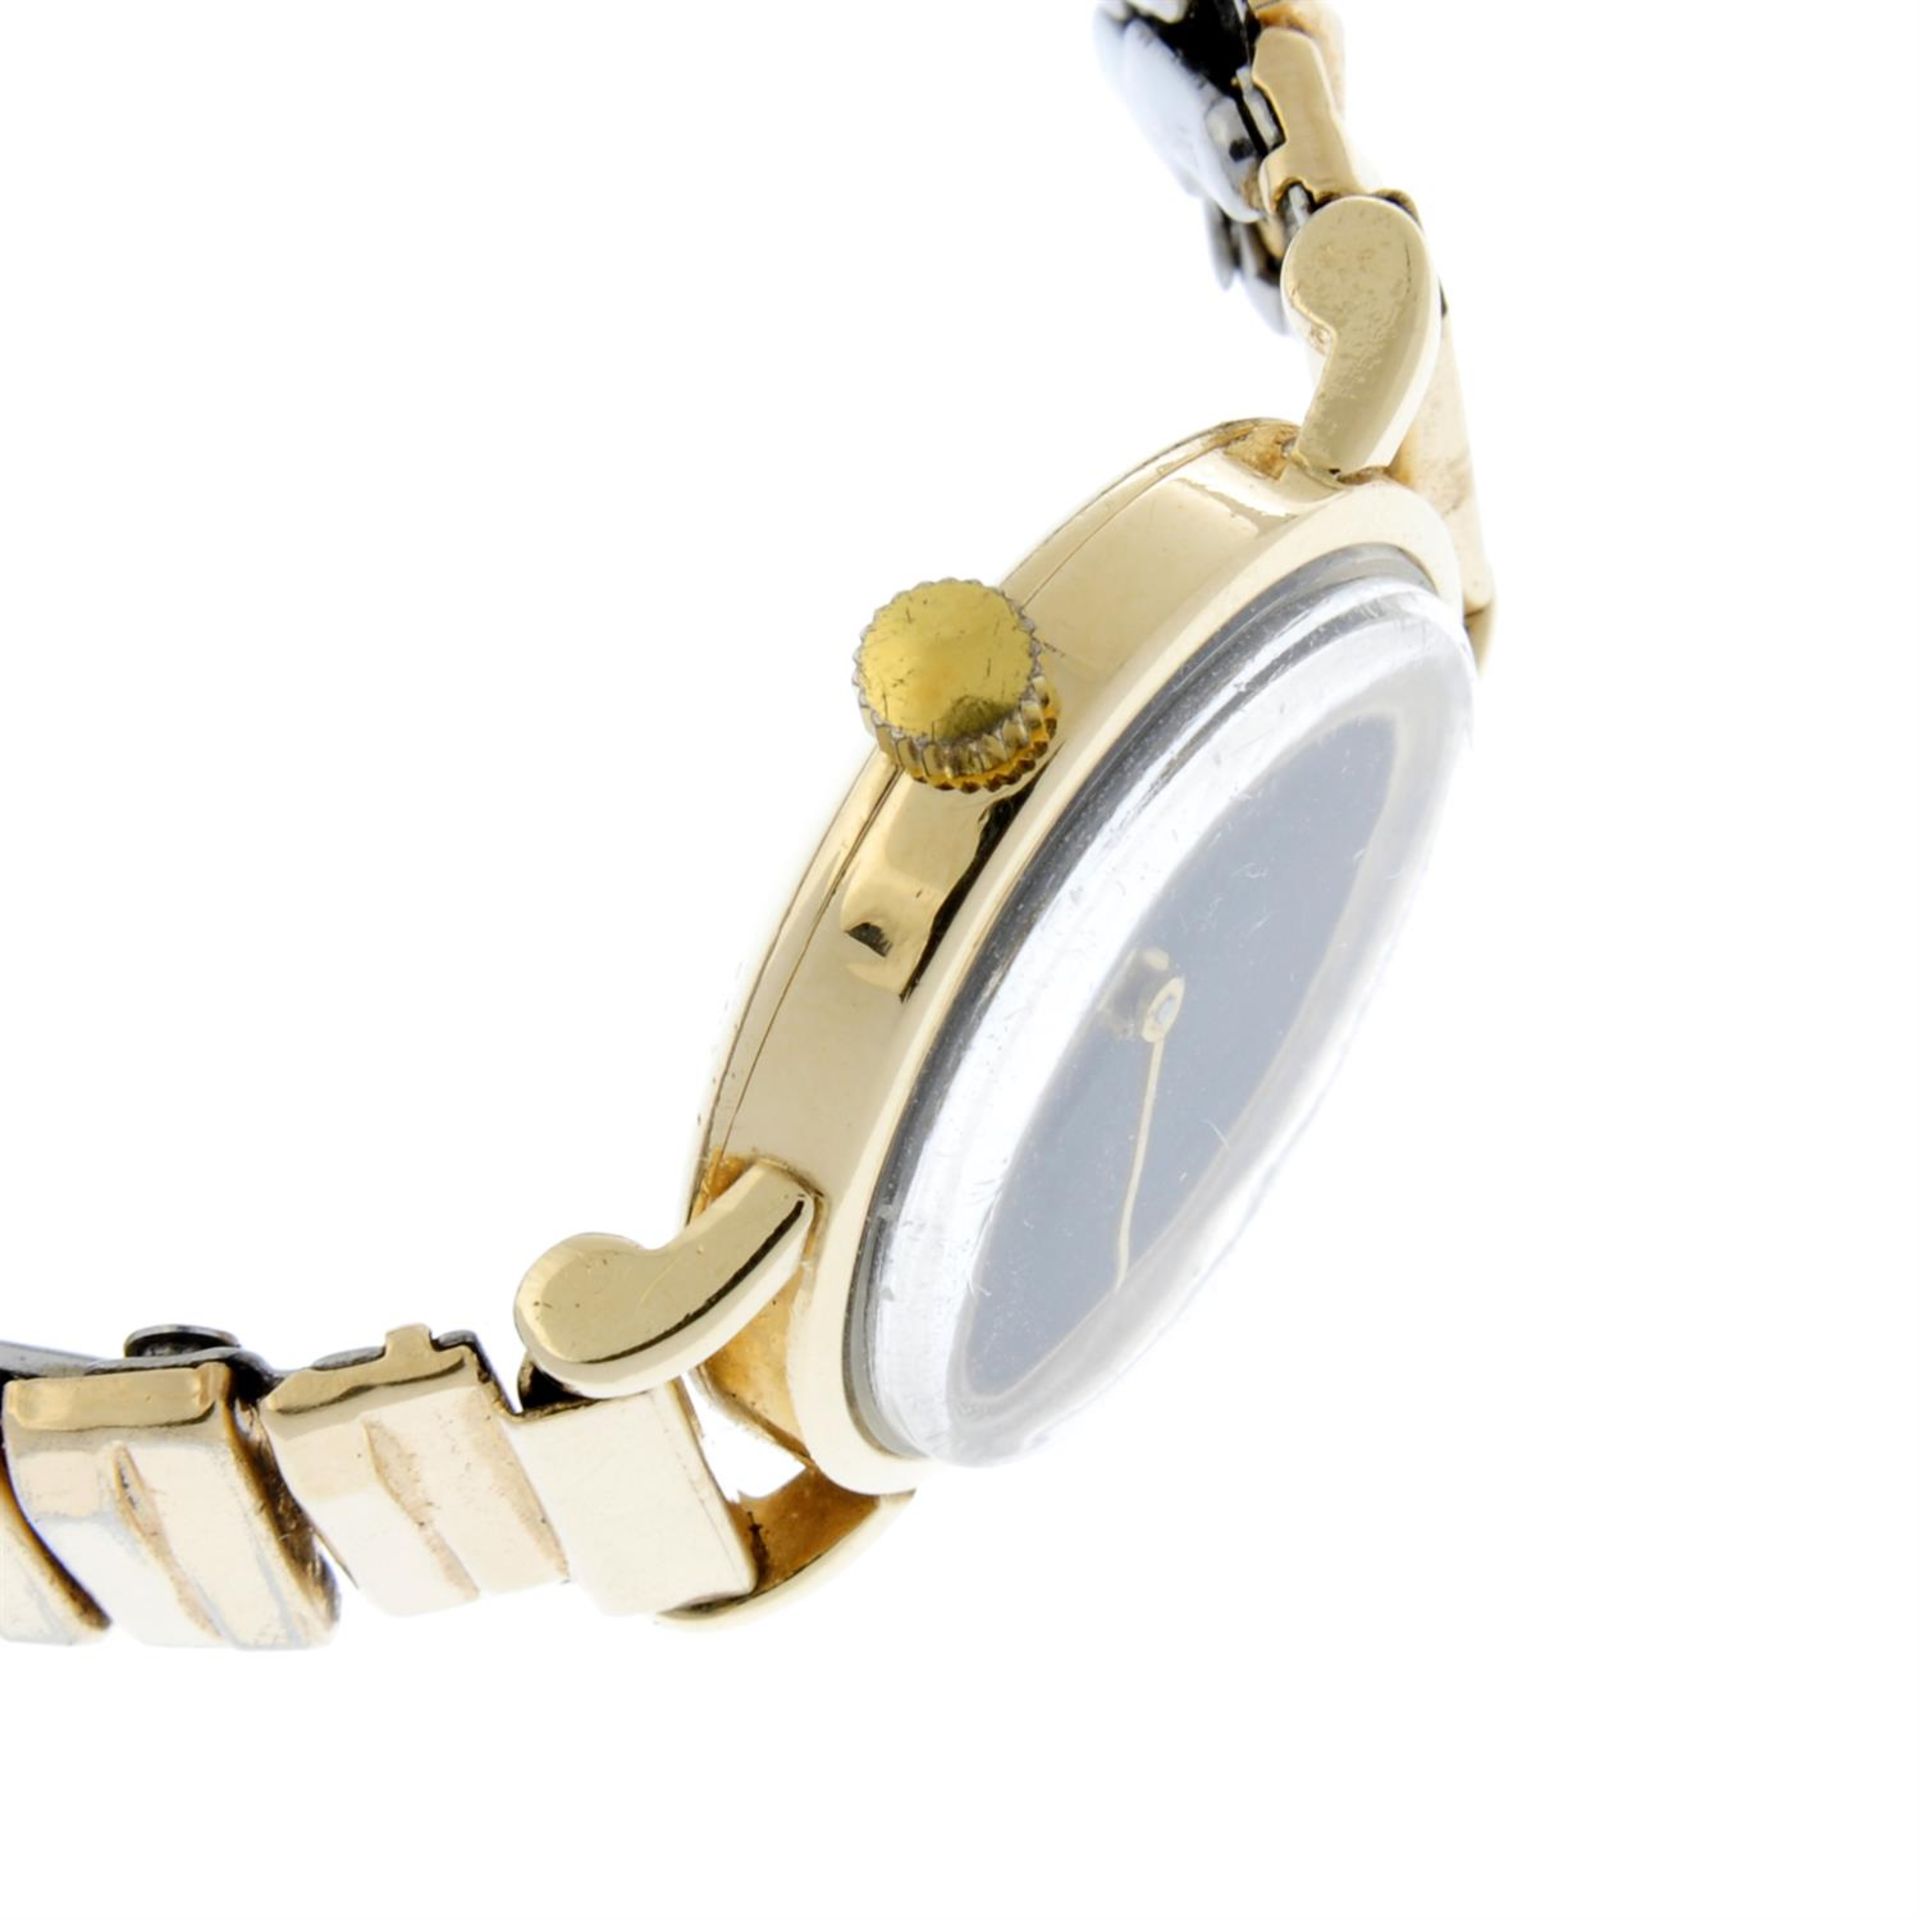 OMEGA - a yellow metal bracelet watch, 20mm - Image 3 of 4